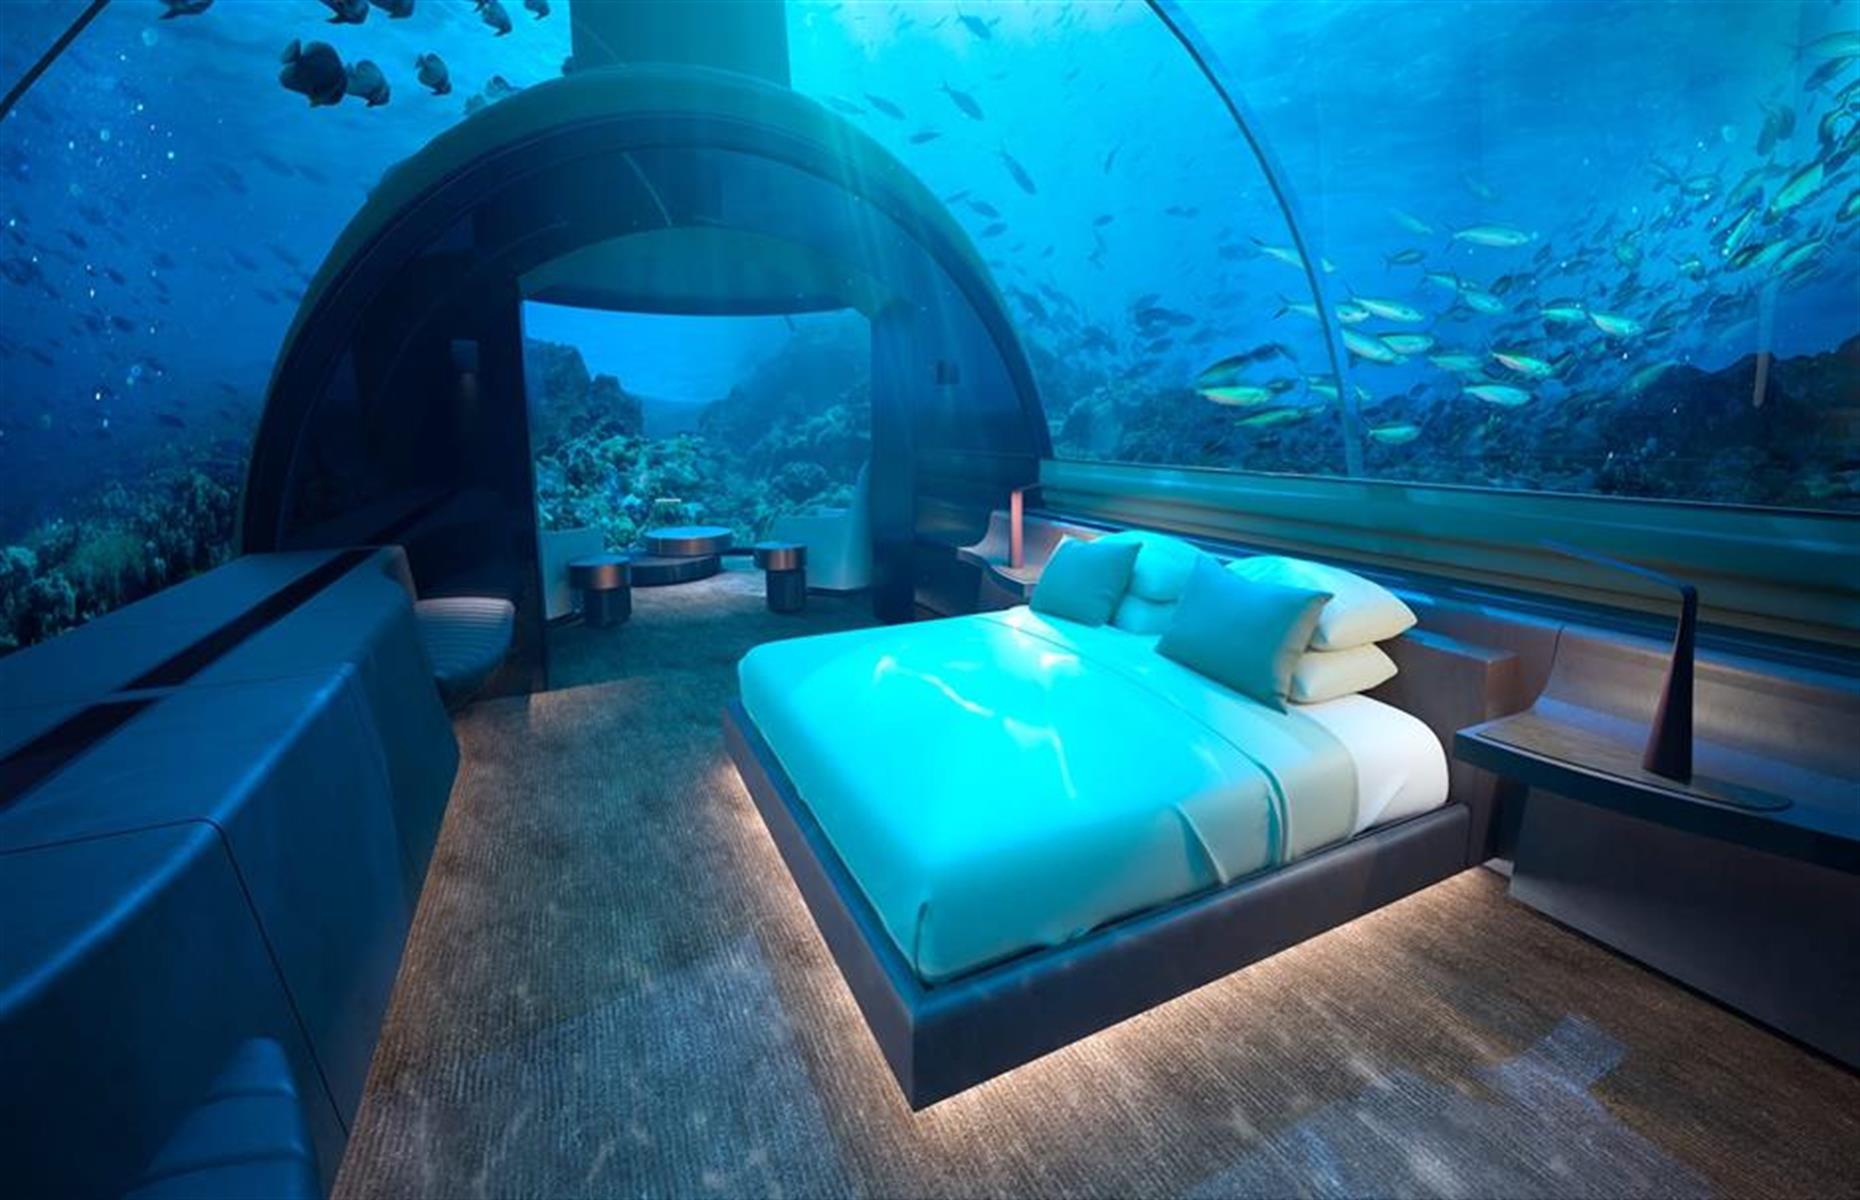 <p>From futuristic chambers attached to the seabed to serene suites with vast windows looking out onto fish-filled aquariums, there are some out-of-this-world underwater hotel rooms that are well worth diving into. Although travel to most of them is limited, read on for a serious dose of armchair travel and wanderlust.</p>